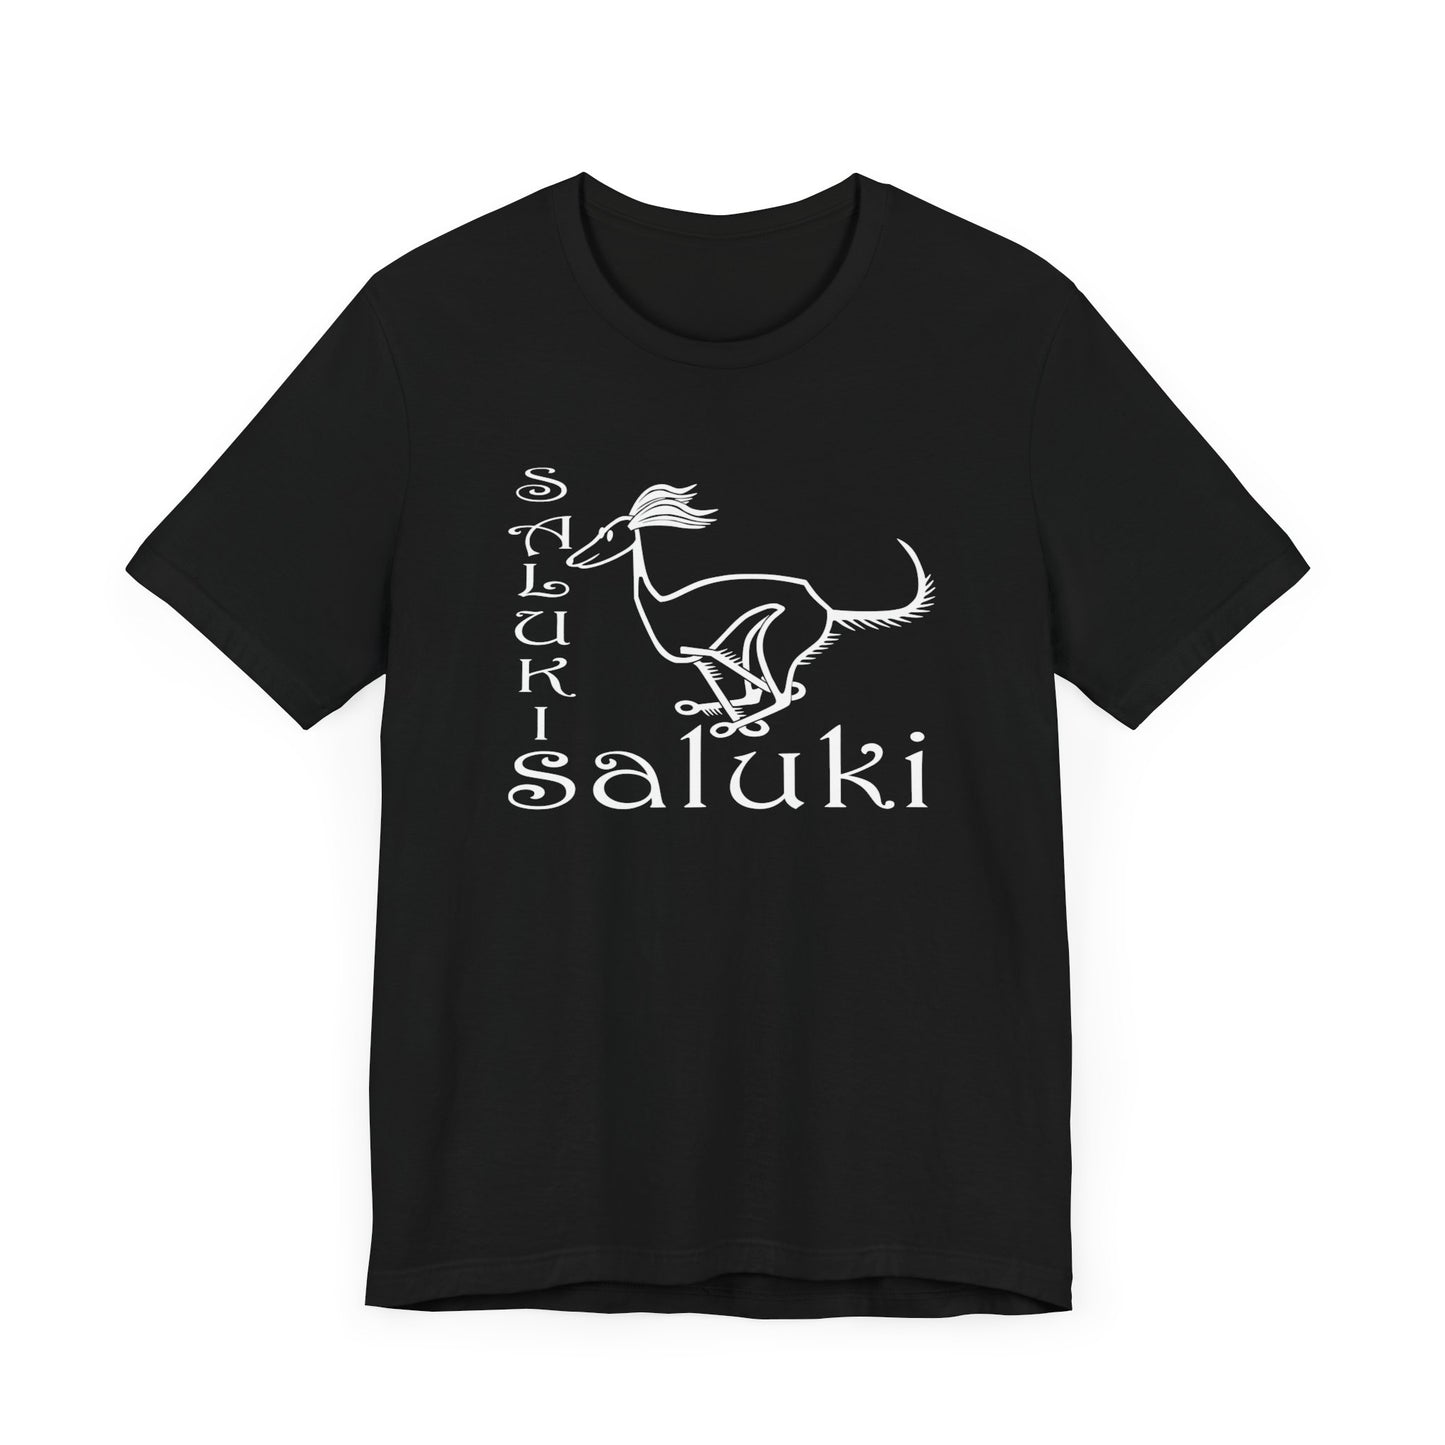 Unisex Jersey Short Sleeve Tee in black featuring a cartoon style Saluki dog breed galloping.